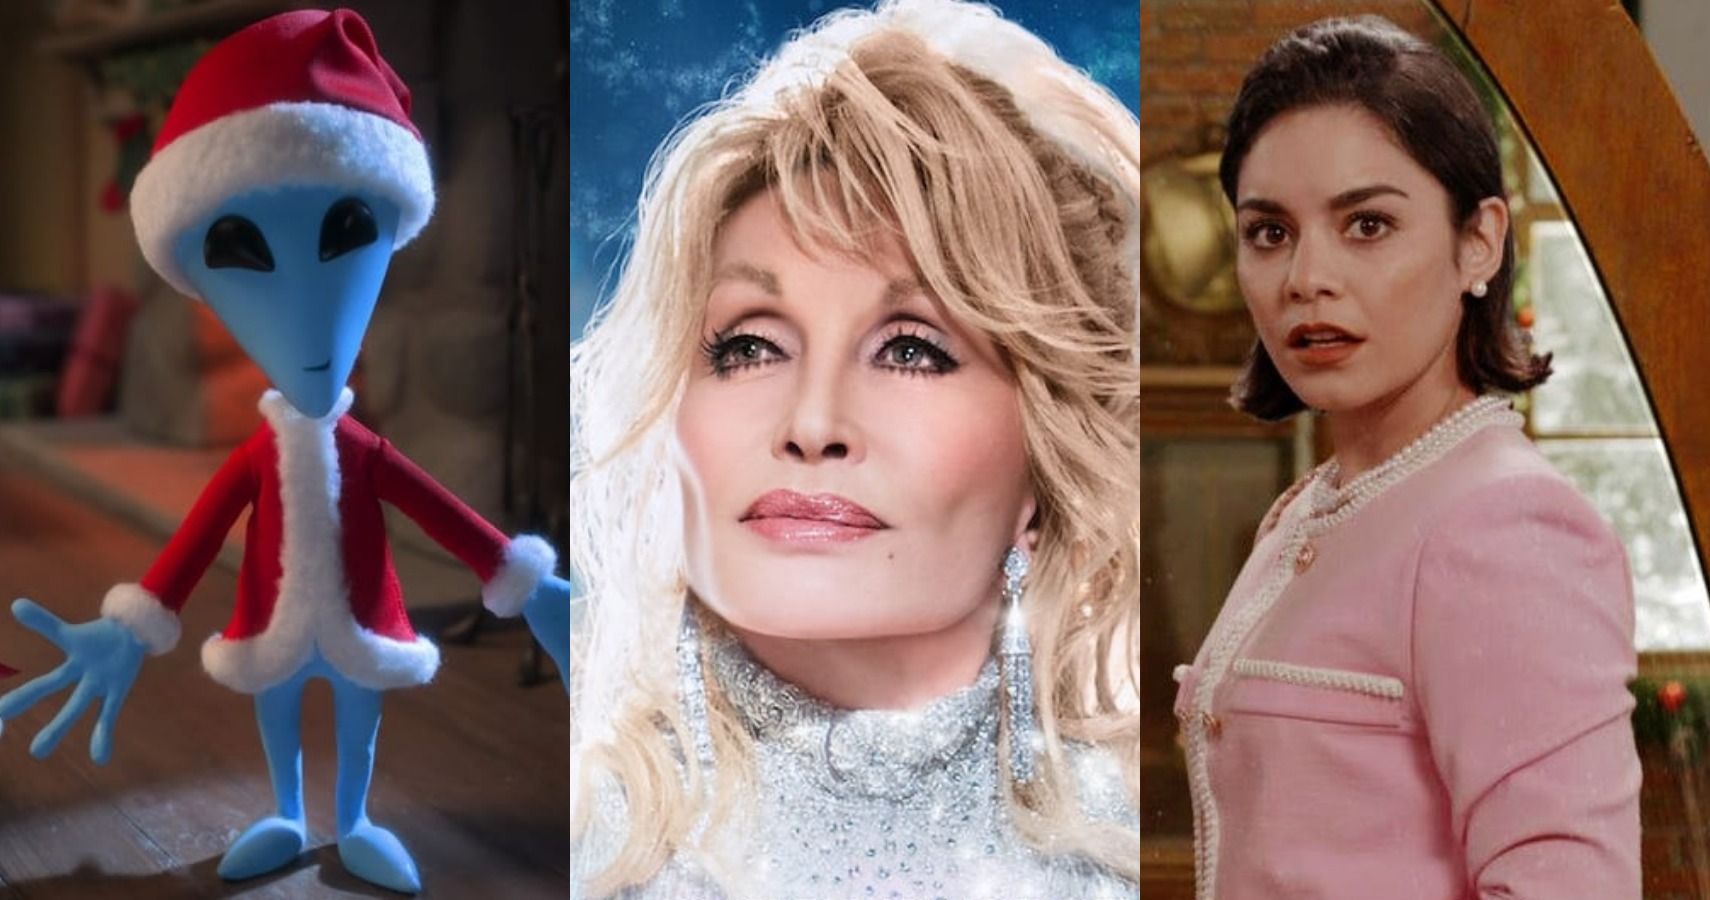 A collage showing Netflix's Christmas and holiday offerings like Alien Xmas, Dolly Parton's Christmas on the Square and The Princess Switch: Switched Again